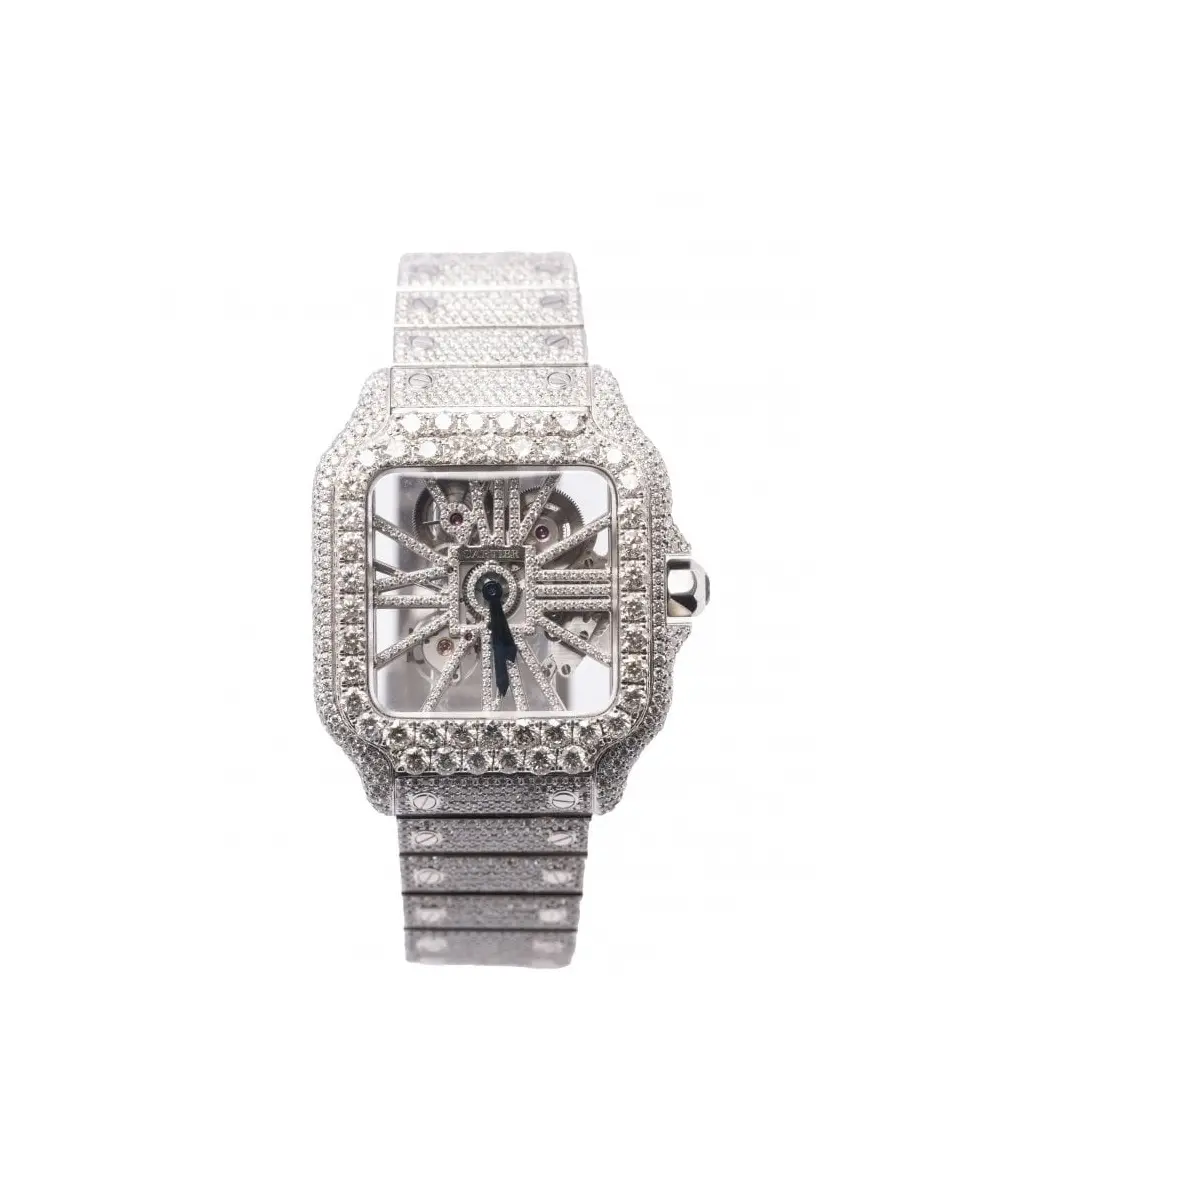 Premium Quality Ice Out Diamond Watch for Wedding Gift Available at Affordable Price from Indian Manufacturer